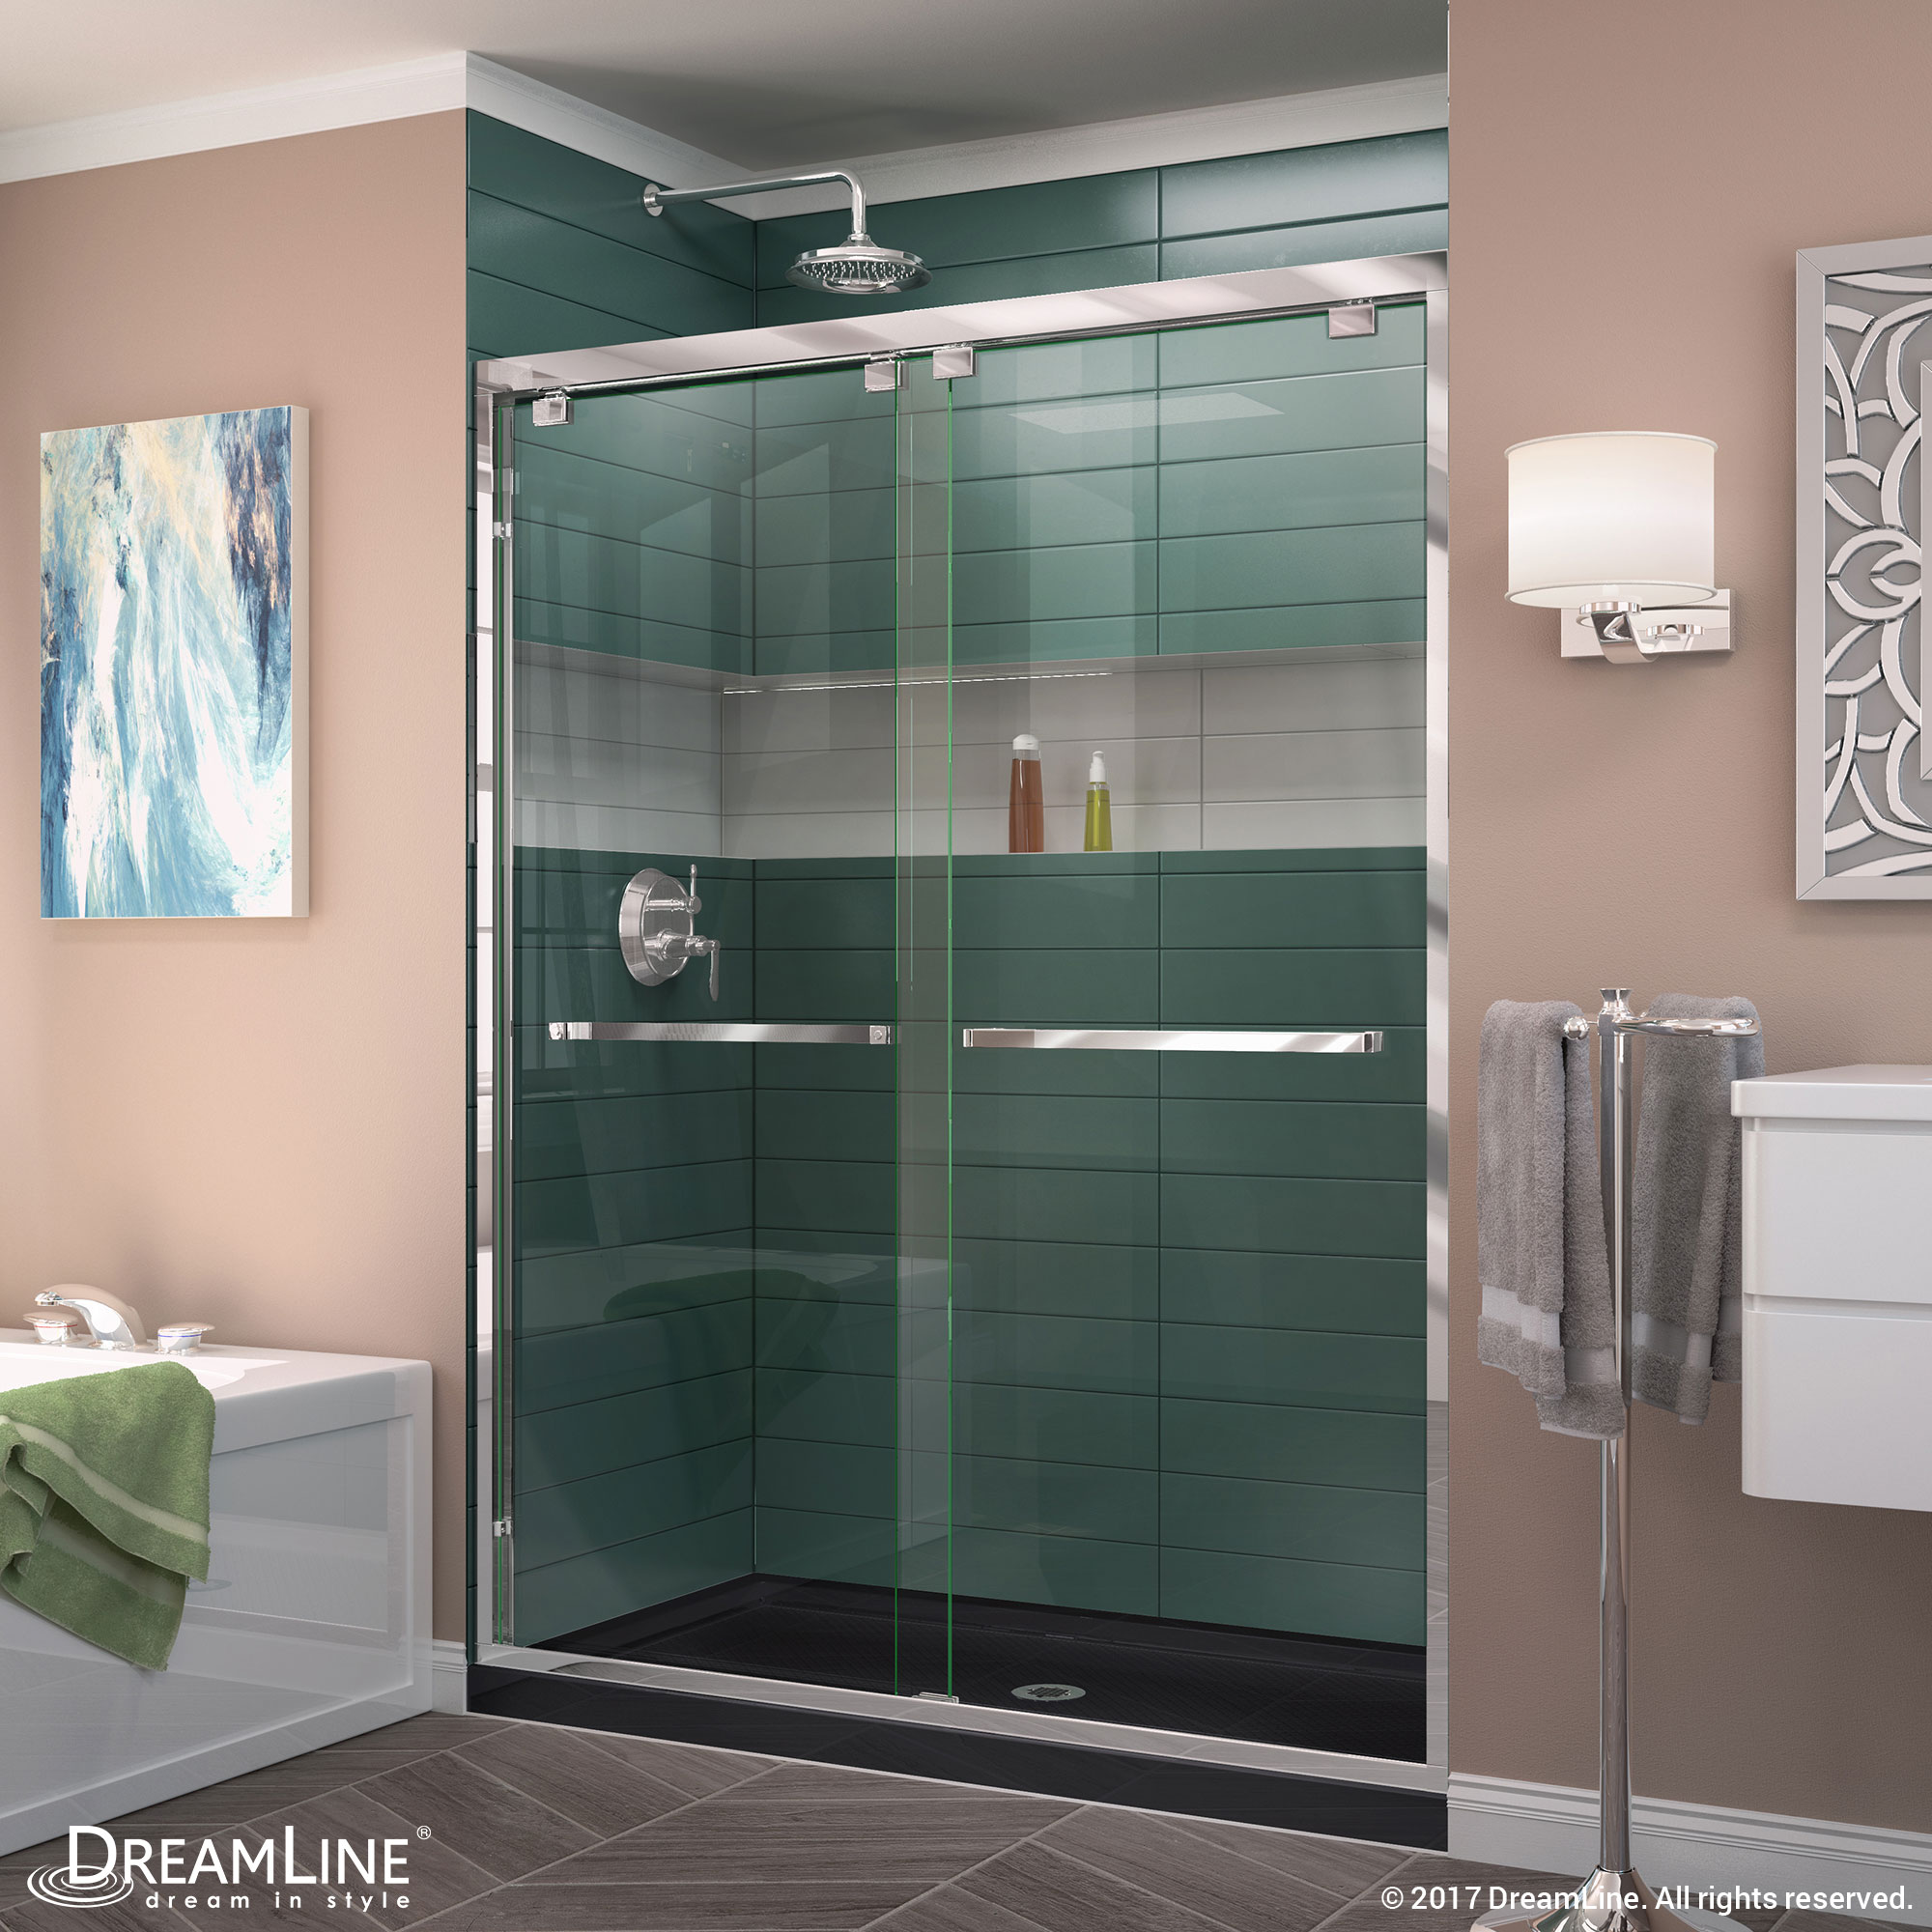 DreamLine Encore 34 in. D x 60 in. W x 78 3/4 in. H Bypass Shower Door in Oil Rubbed Bronze and Center Drain Biscuit Base Kit